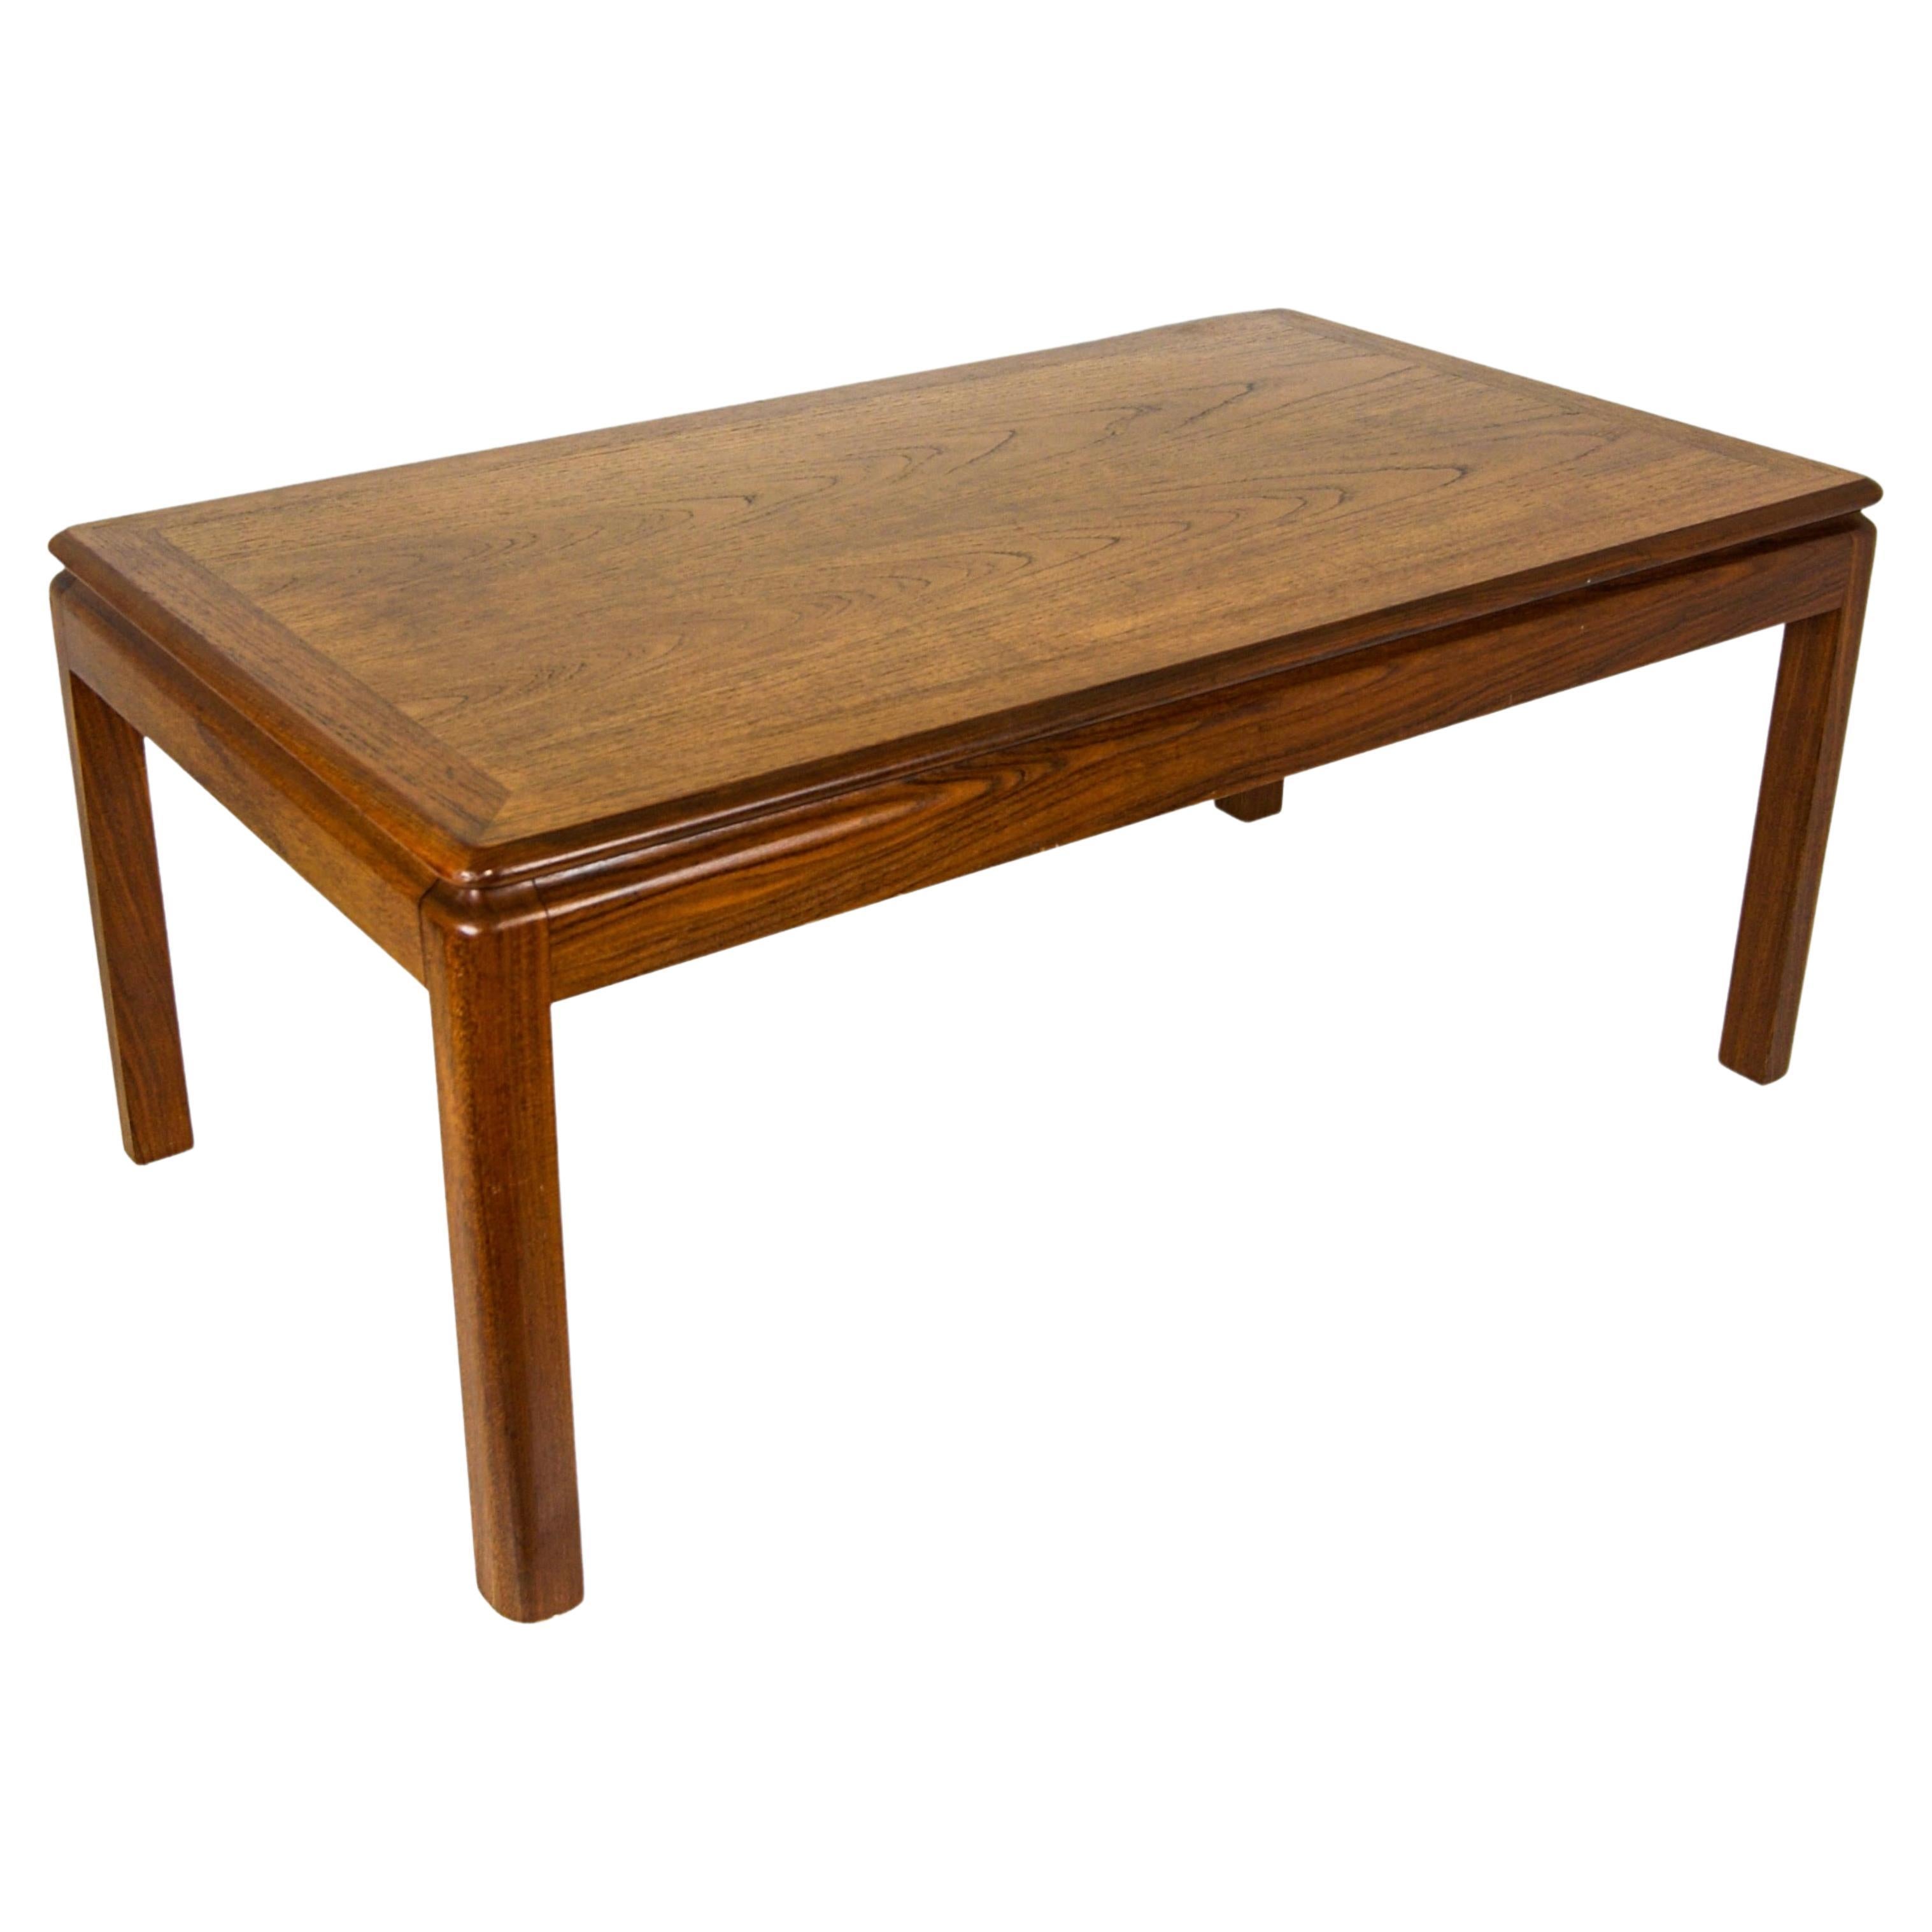 Vintage British made teak coffee table by G Pan.
 Minimalist solid teak coffee table with a beautiful patina to the wood grain.
Large sized strong sturdy coffee table.
Labeled 'G Plan' to the base.

Light wear consistent with age and use,